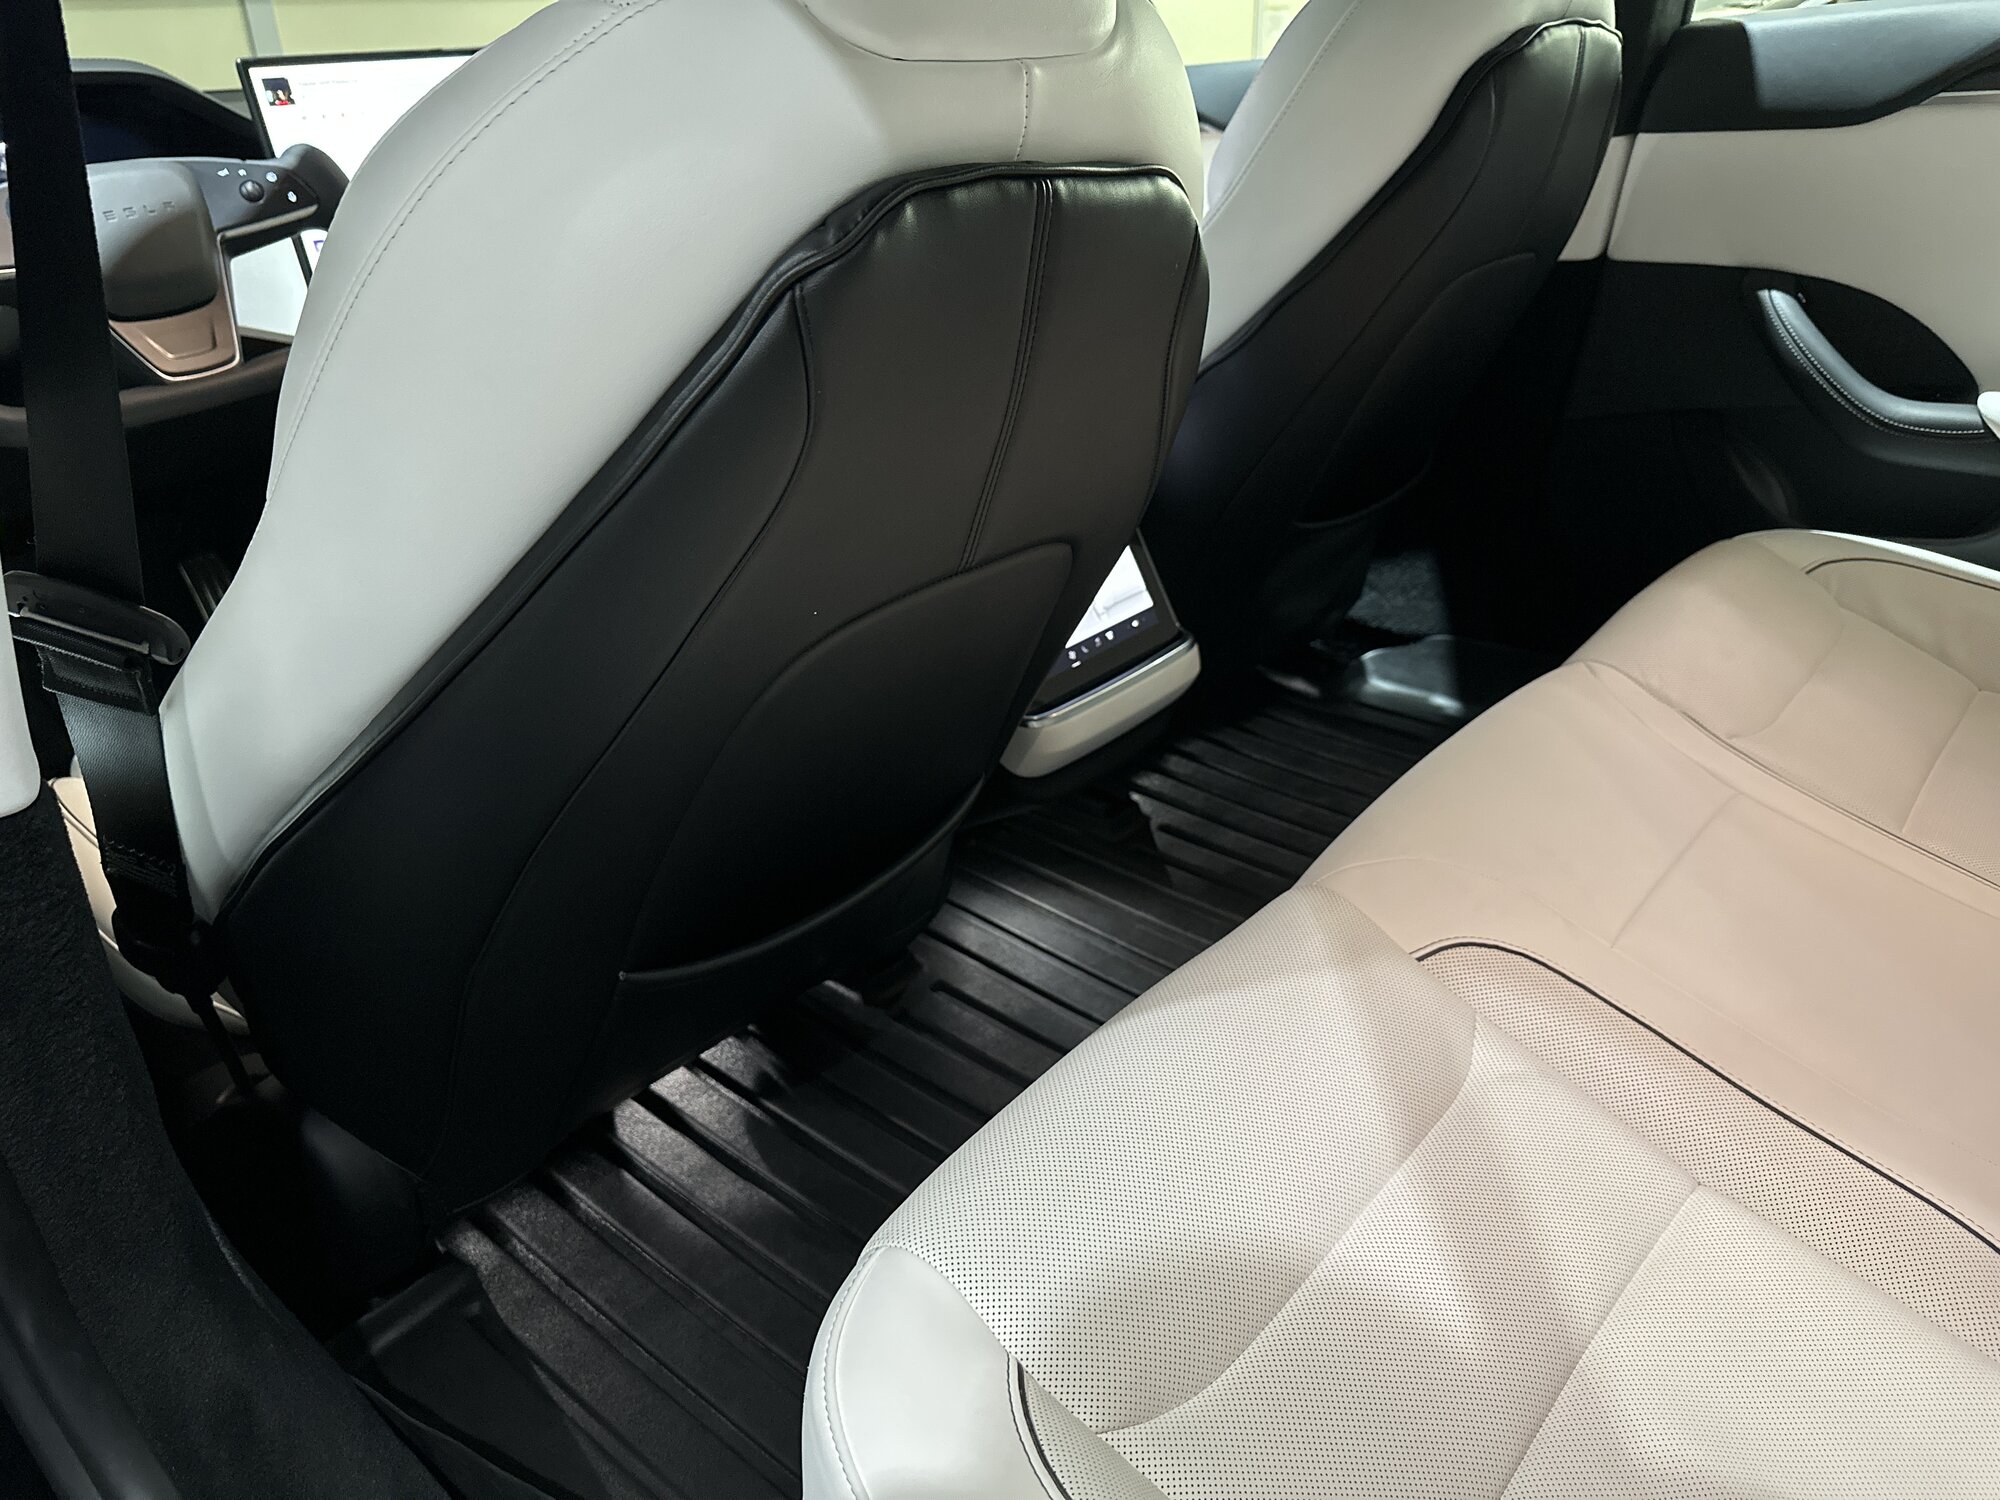 Available - 2021+ MS OEM all weather mats & BASENOR seat back